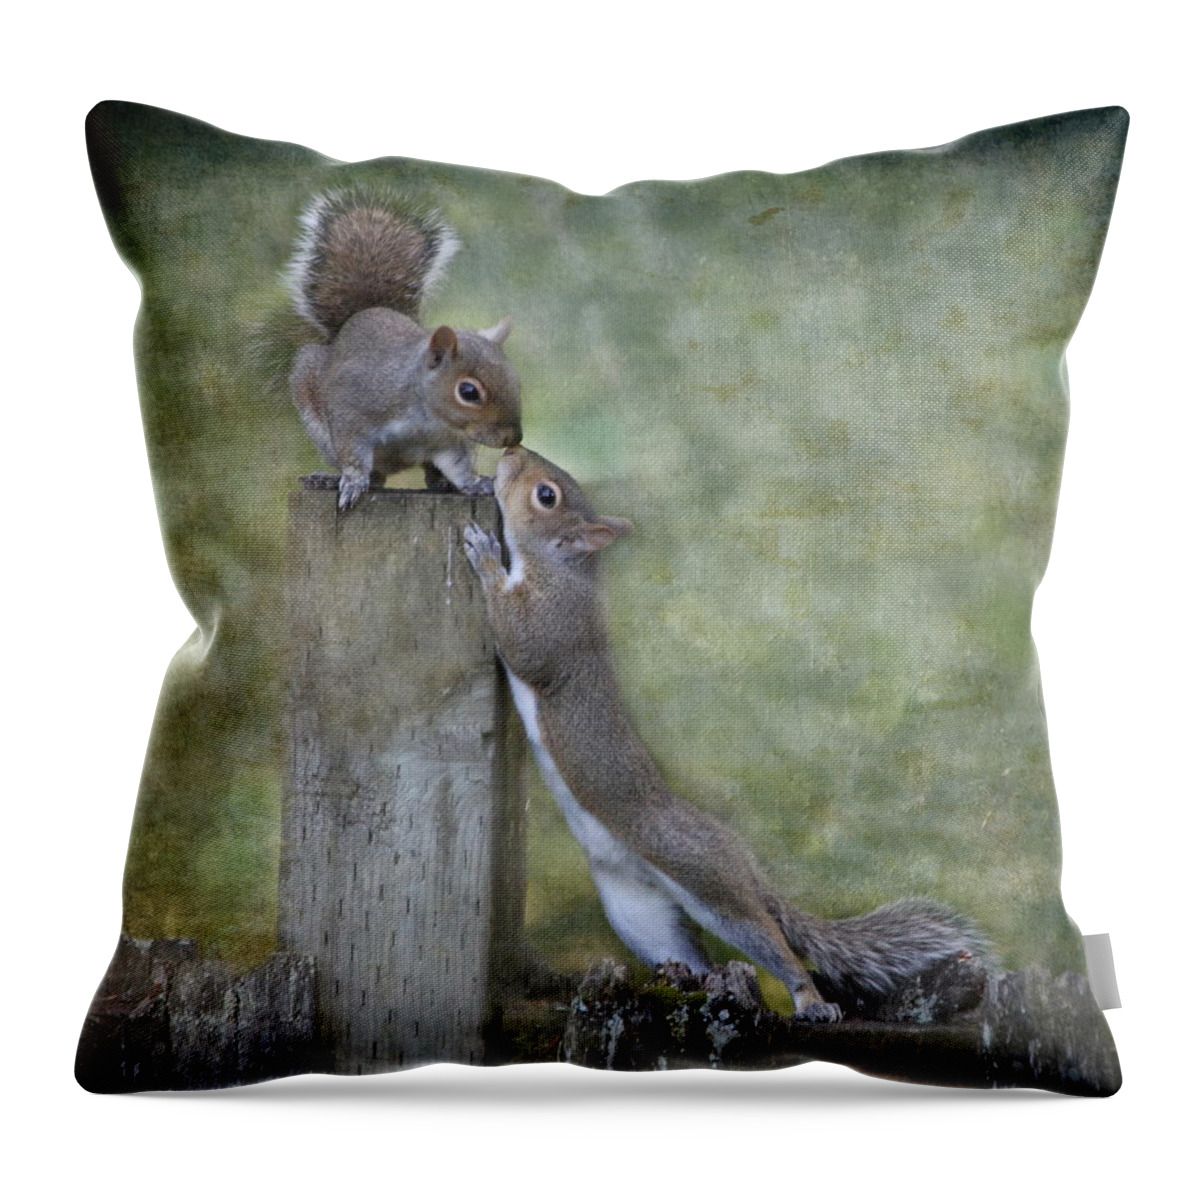 Squirrel Throw Pillow featuring the photograph First Kiss by Angie Vogel